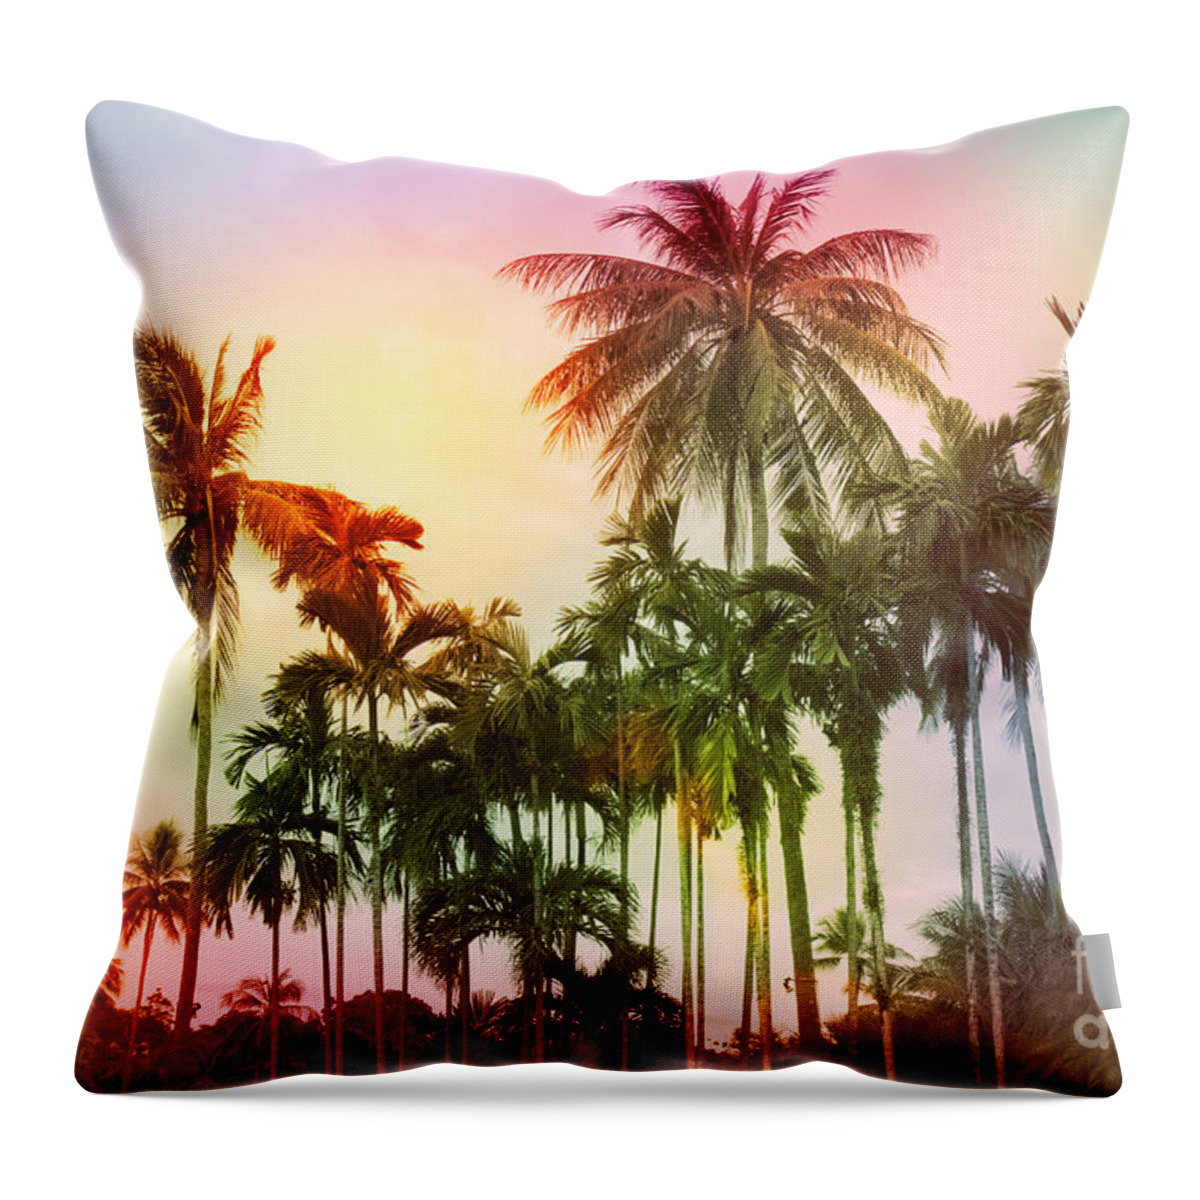 Tropical Throw Pillow featuring the photograph Tropical 11 by Mark Ashkenazi